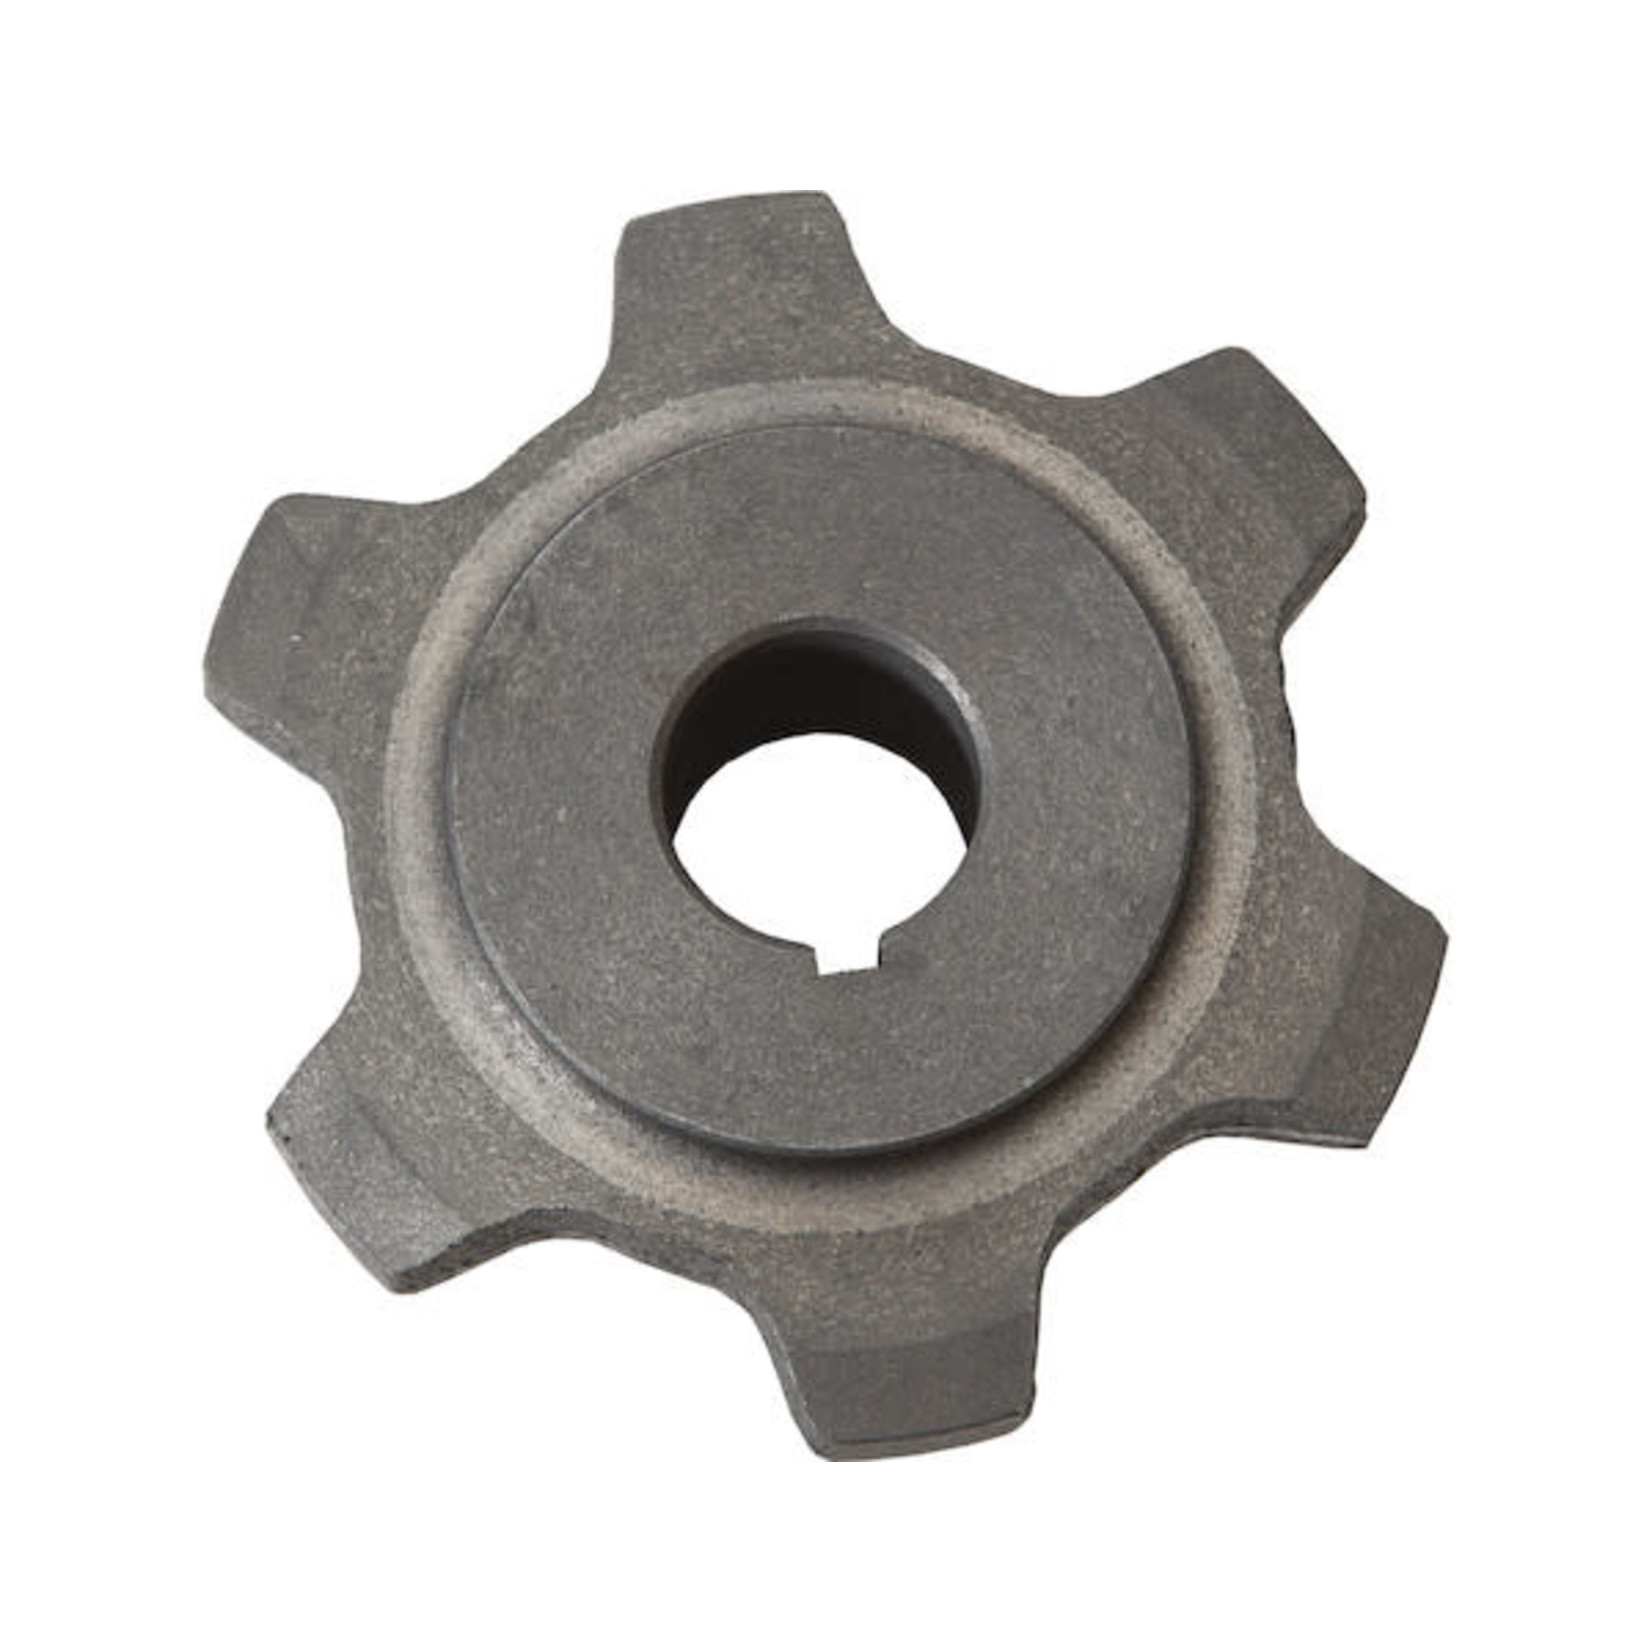 SaltDogg Replacement Drive Assembly 9-10 Foot Chain Sprocket